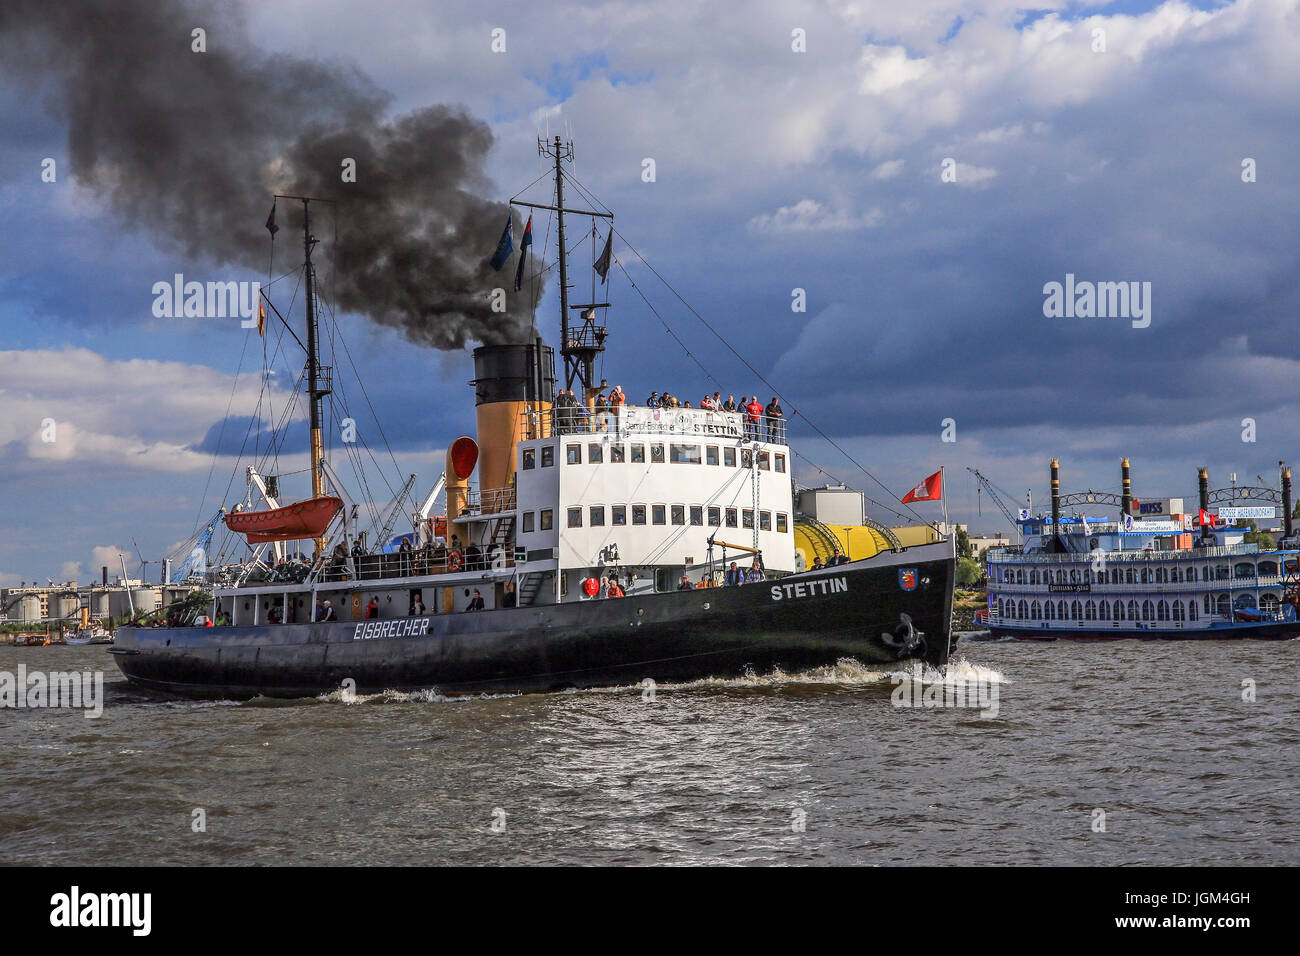 The Federal Republic of Germany, Hamburg, harbour, ship, ships, sailing ship, sailing ships, ice-breakers Szczecin, harbour round trip, transport, tra Stock Photo